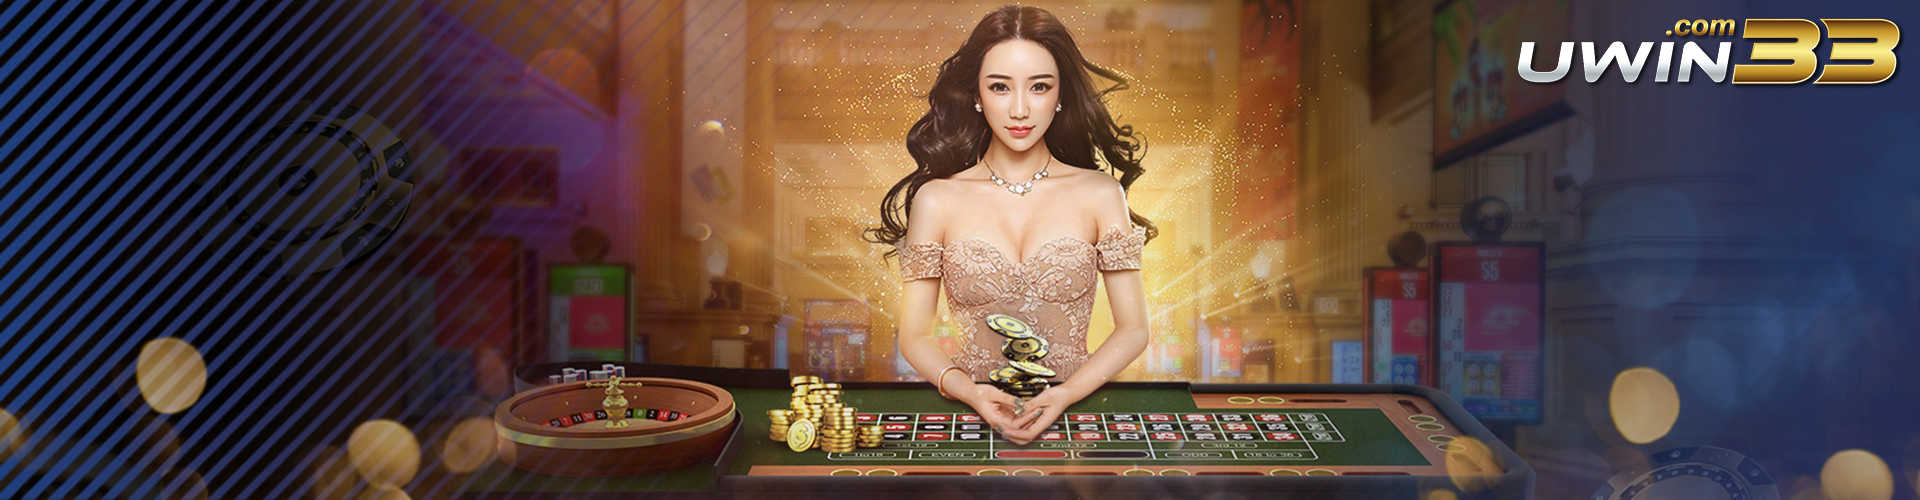 Top Rated Online Casino